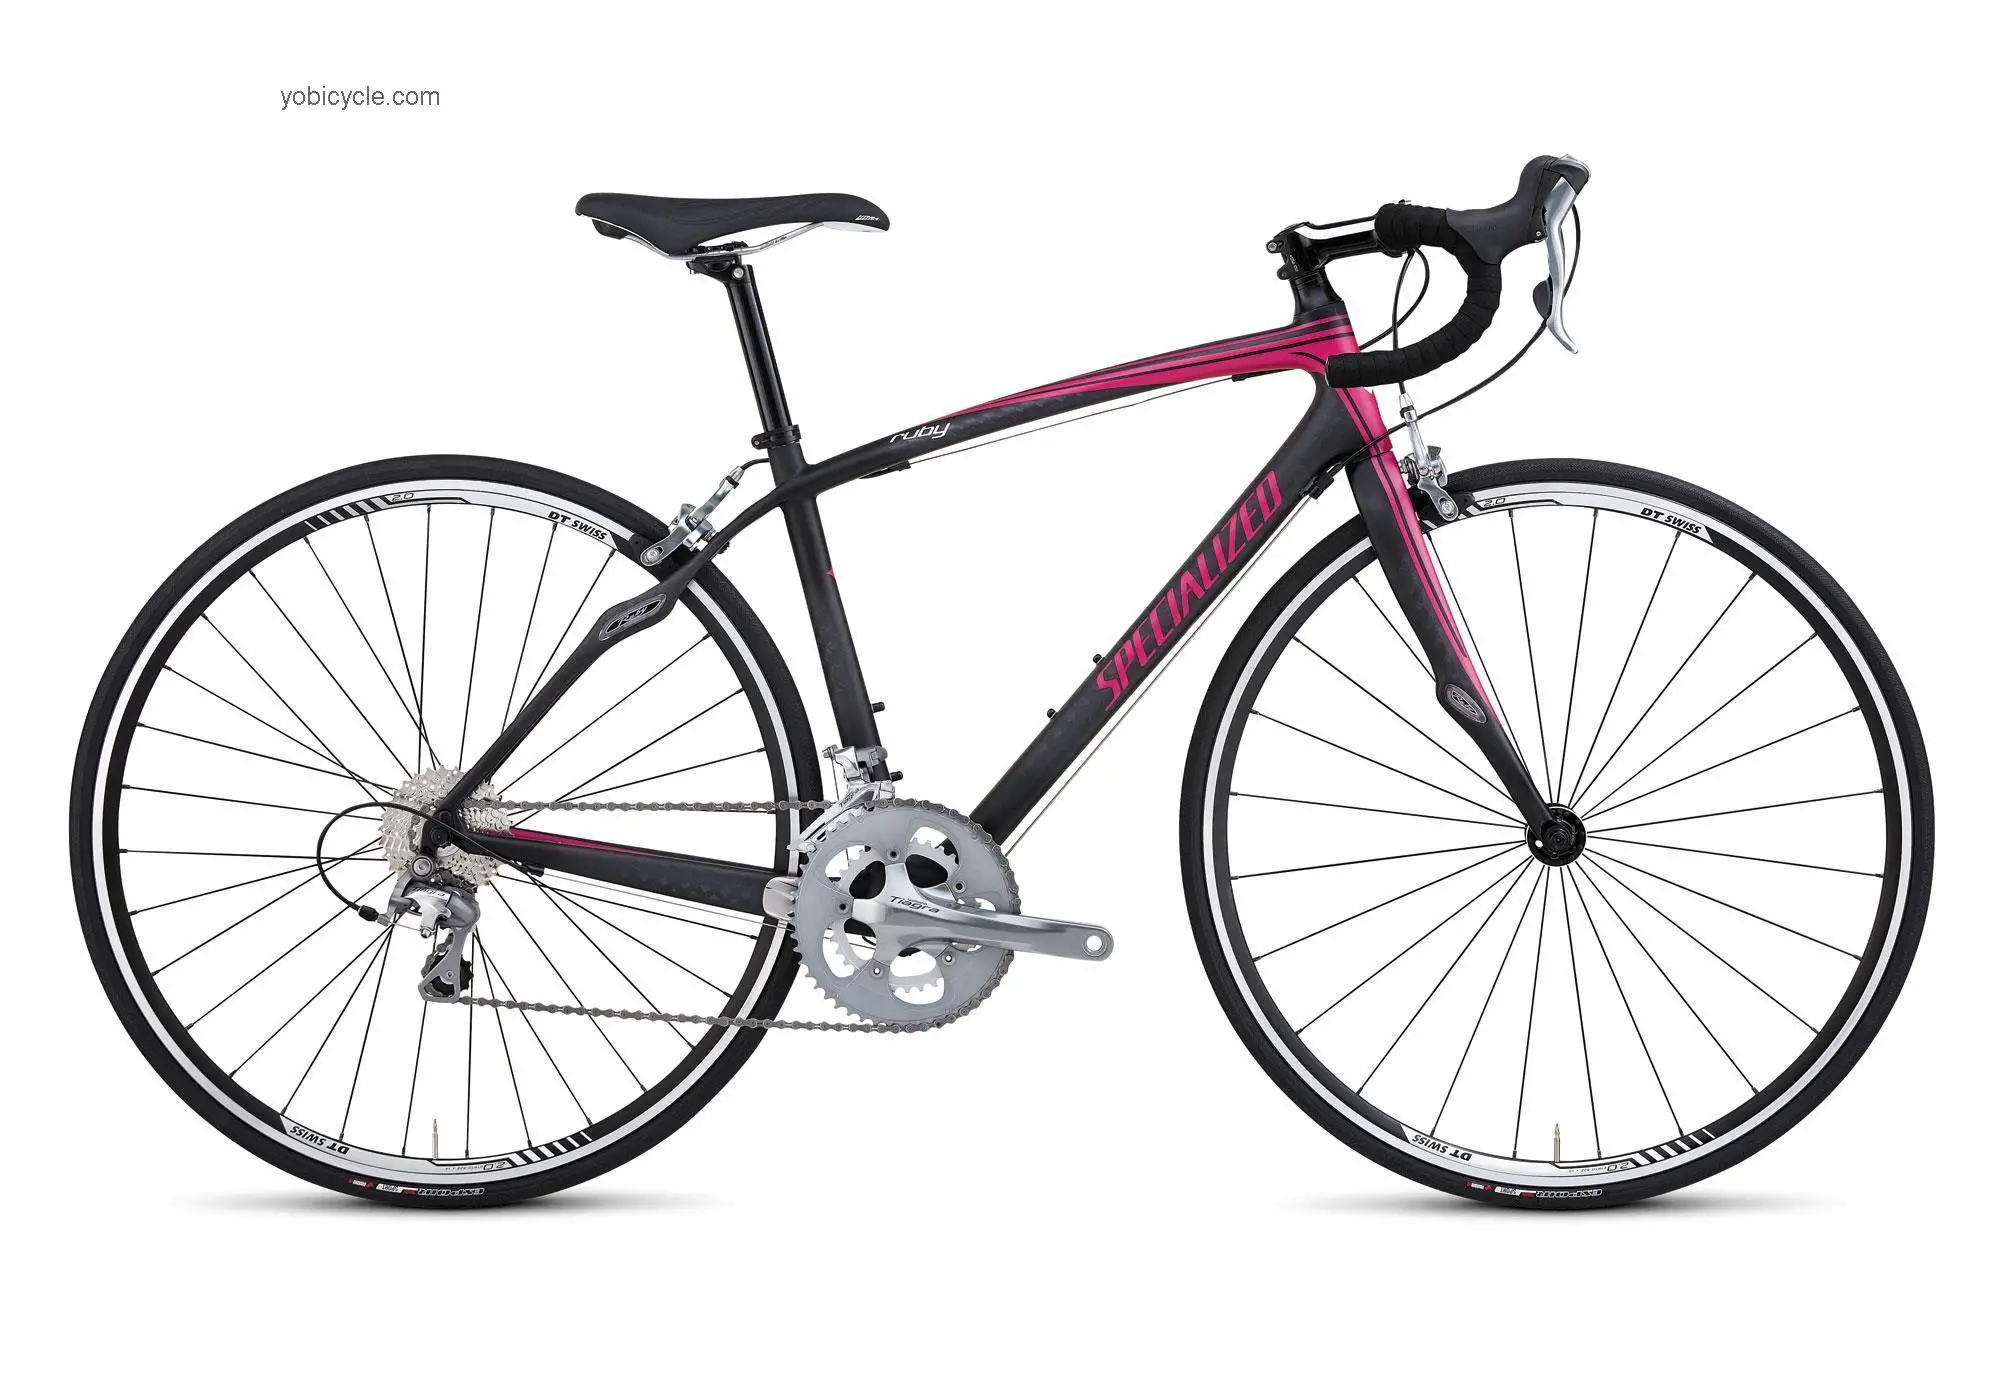 Specialized  Ruby Compact Technical data and specifications